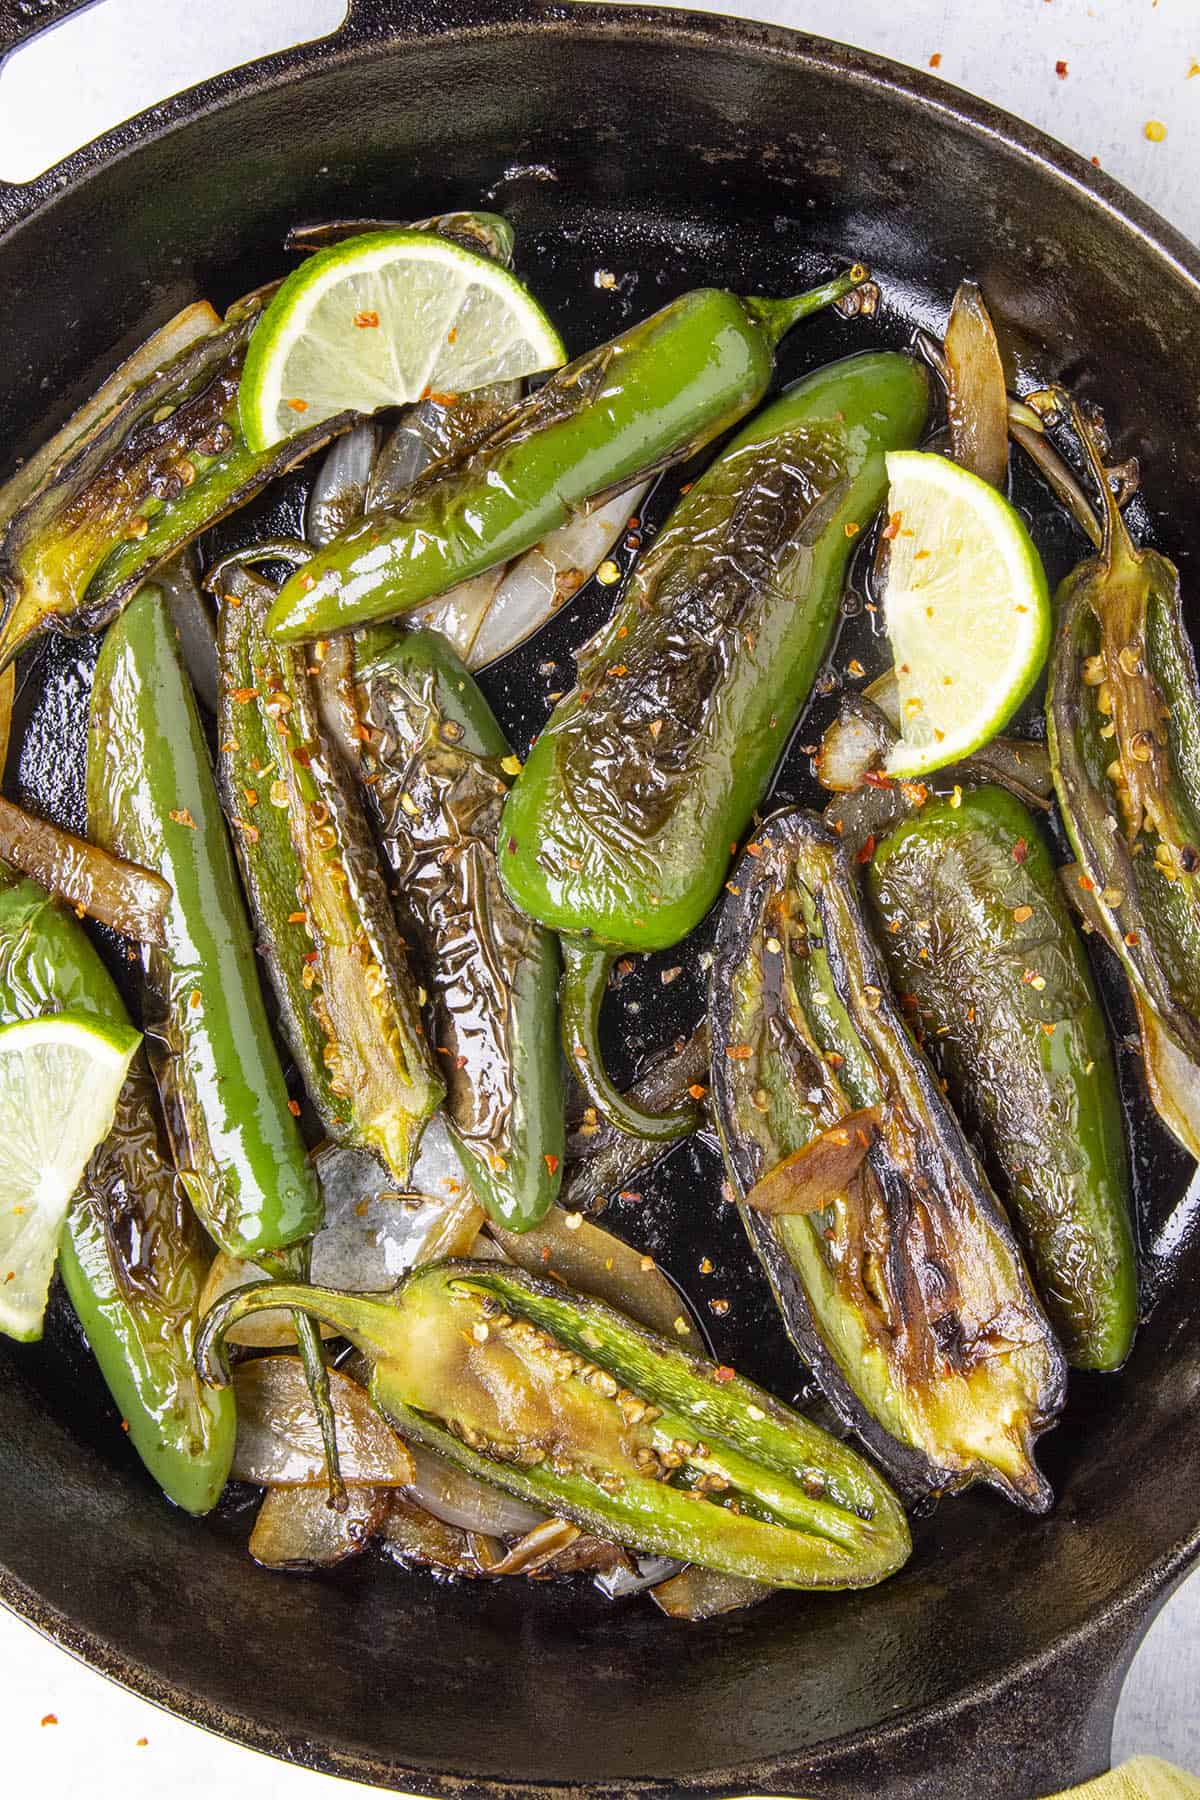 Chiles Toreados, or blistered chiles, in a pan, ready to serve